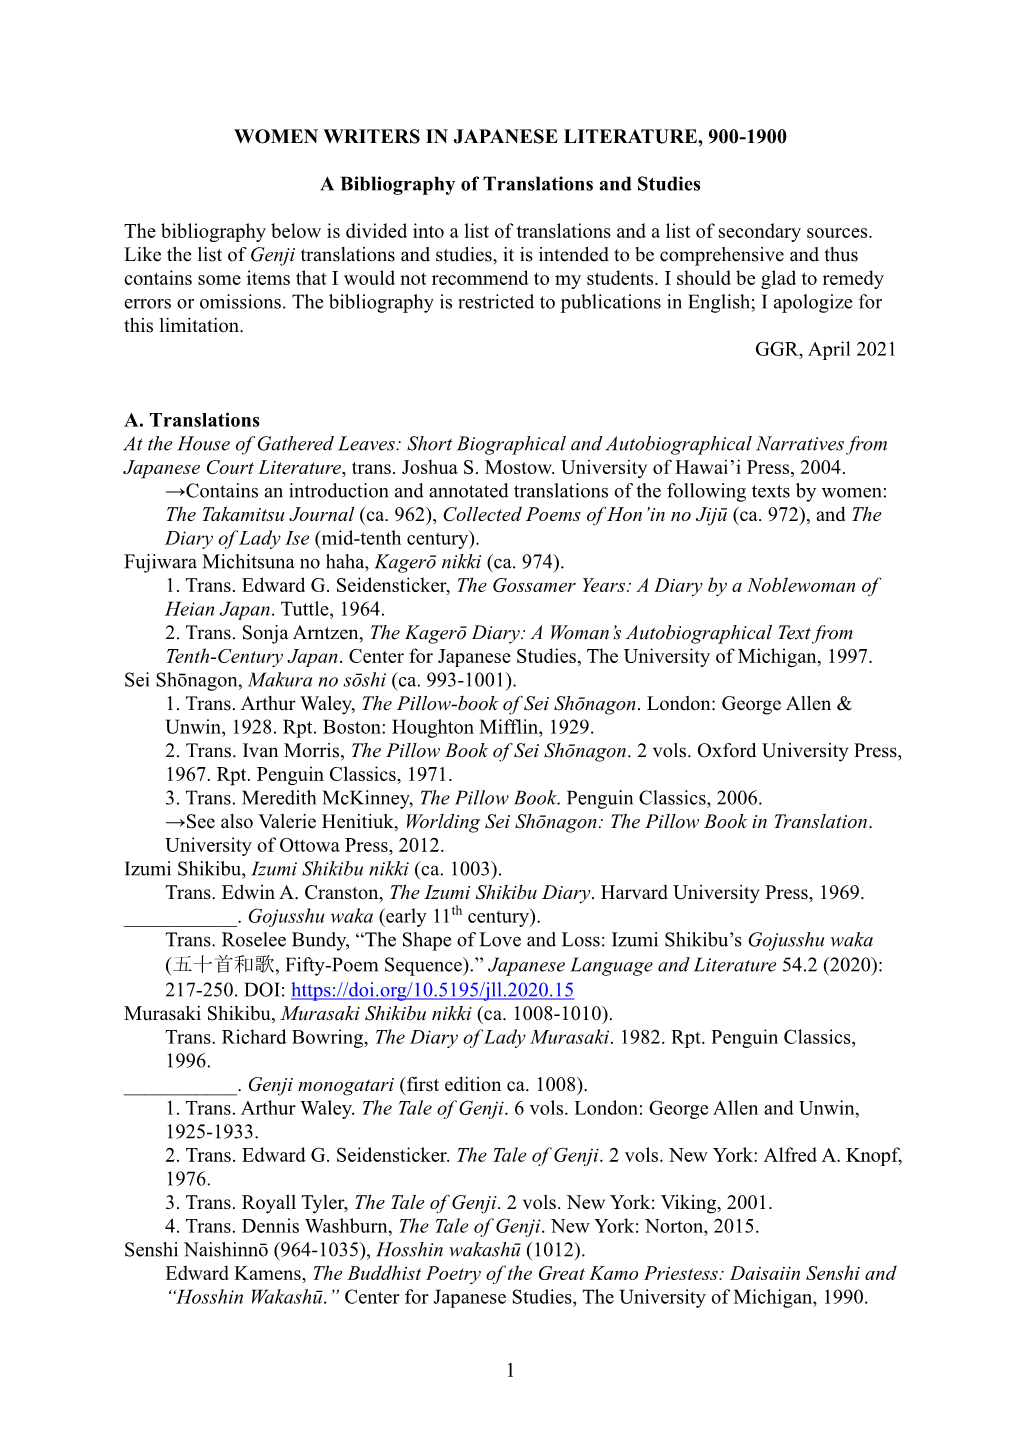 Bibliography in PDF Format